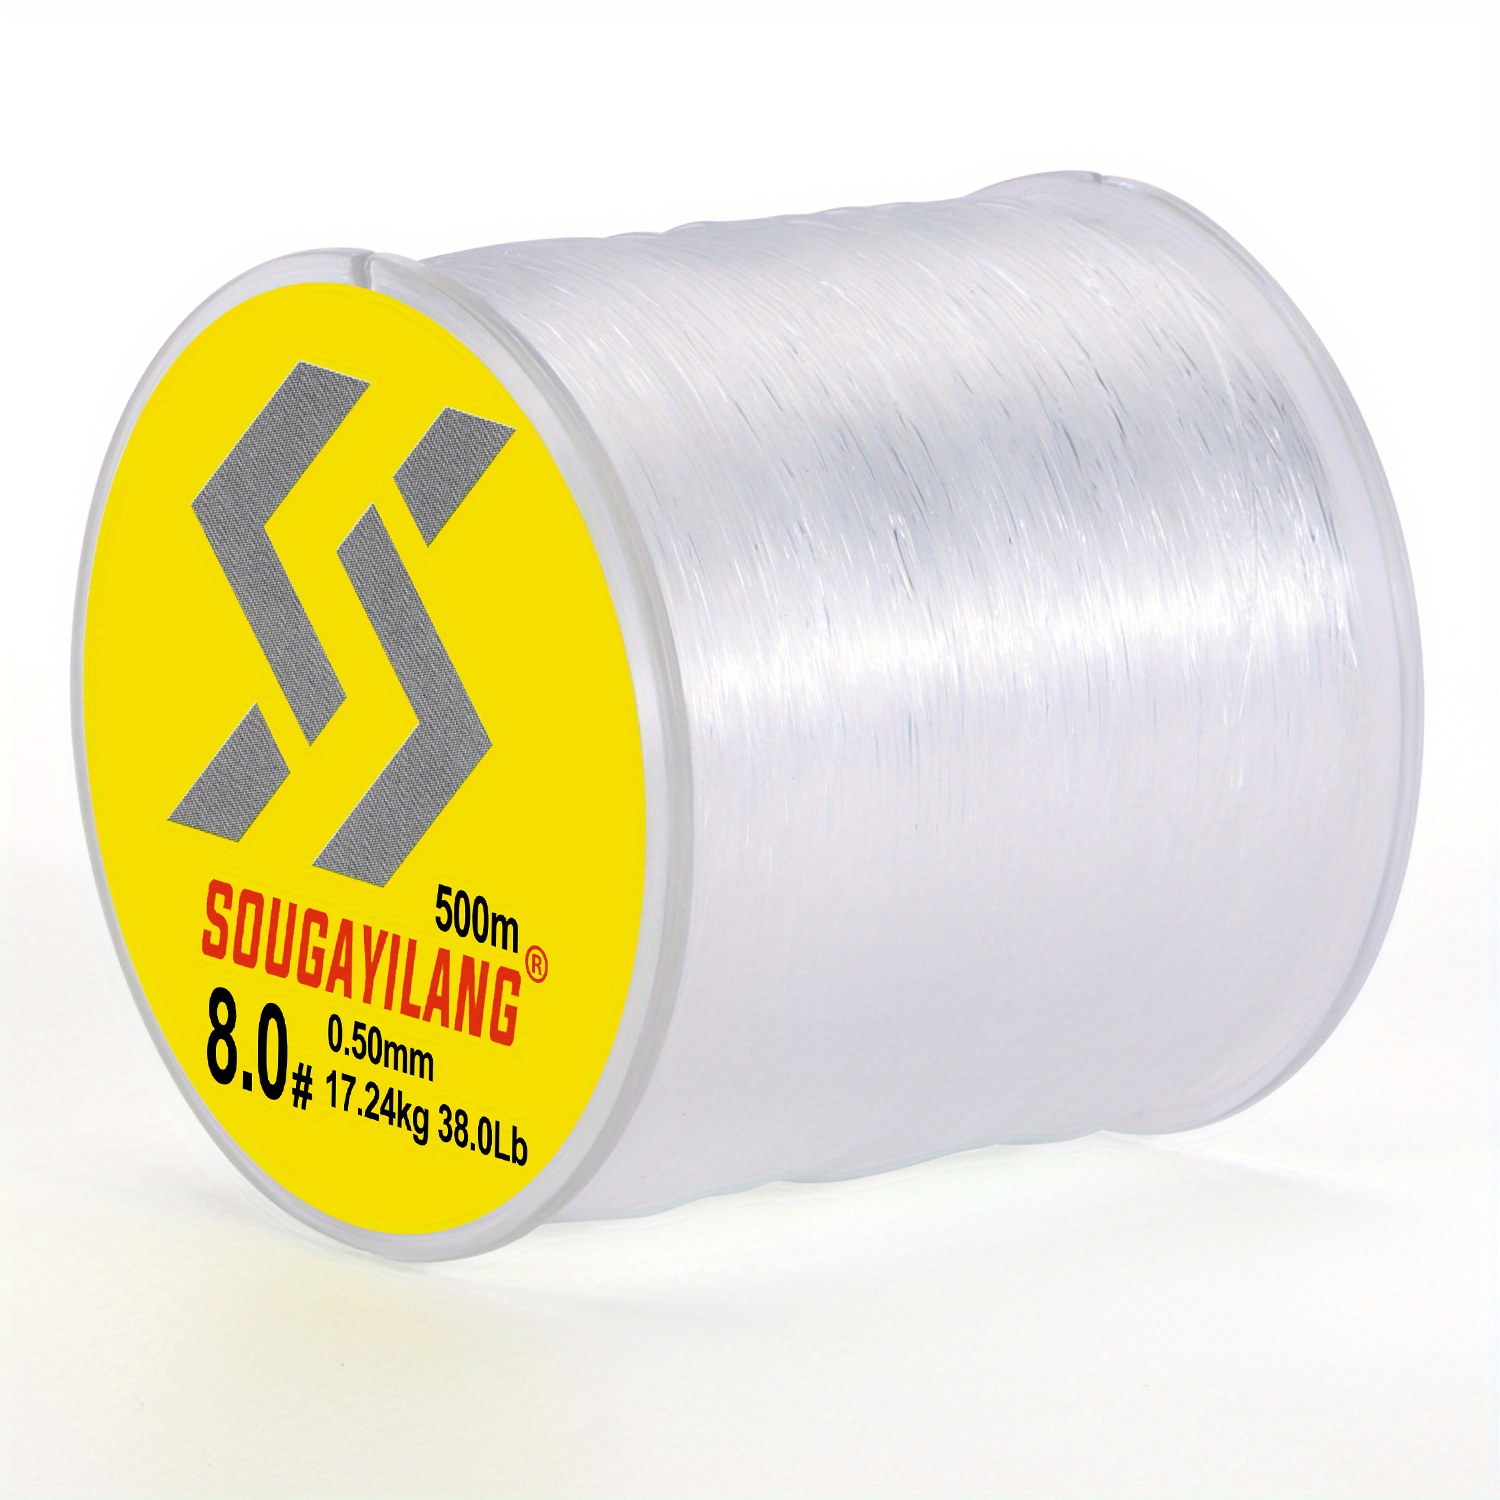 Sougayilang Fishing Line Nylon String Cord Clear Fluorocarbon Strong  Monofilament Fishing Wire-Purple-8.0#